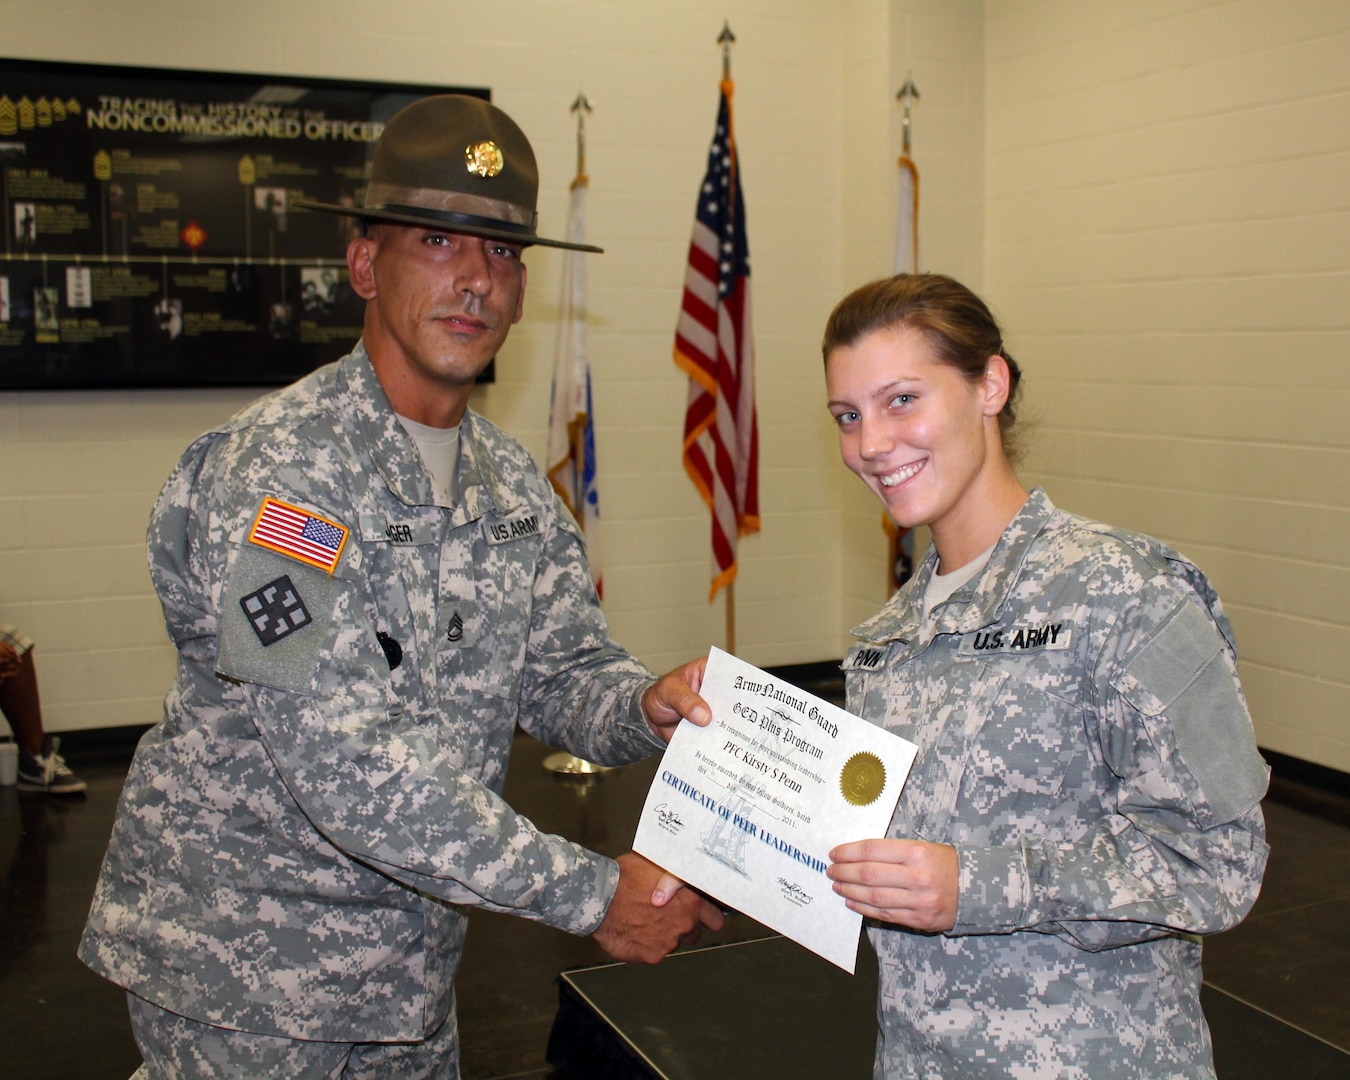 Army Pfc. Kirsty Penn receives a Class Peer Leader Certificate from Army Drill Sgt. Eric Jaeger, Sept. 9, 2011, at Camp Robinson in North Little Rock, Ark. Penn was the first female recruit to receive the honor as Class Peer Leader in the program's history. Since 2006, the National Guard GED Plus program has conferred more than 13,000 GED diplomas to Soldiers nationwide.